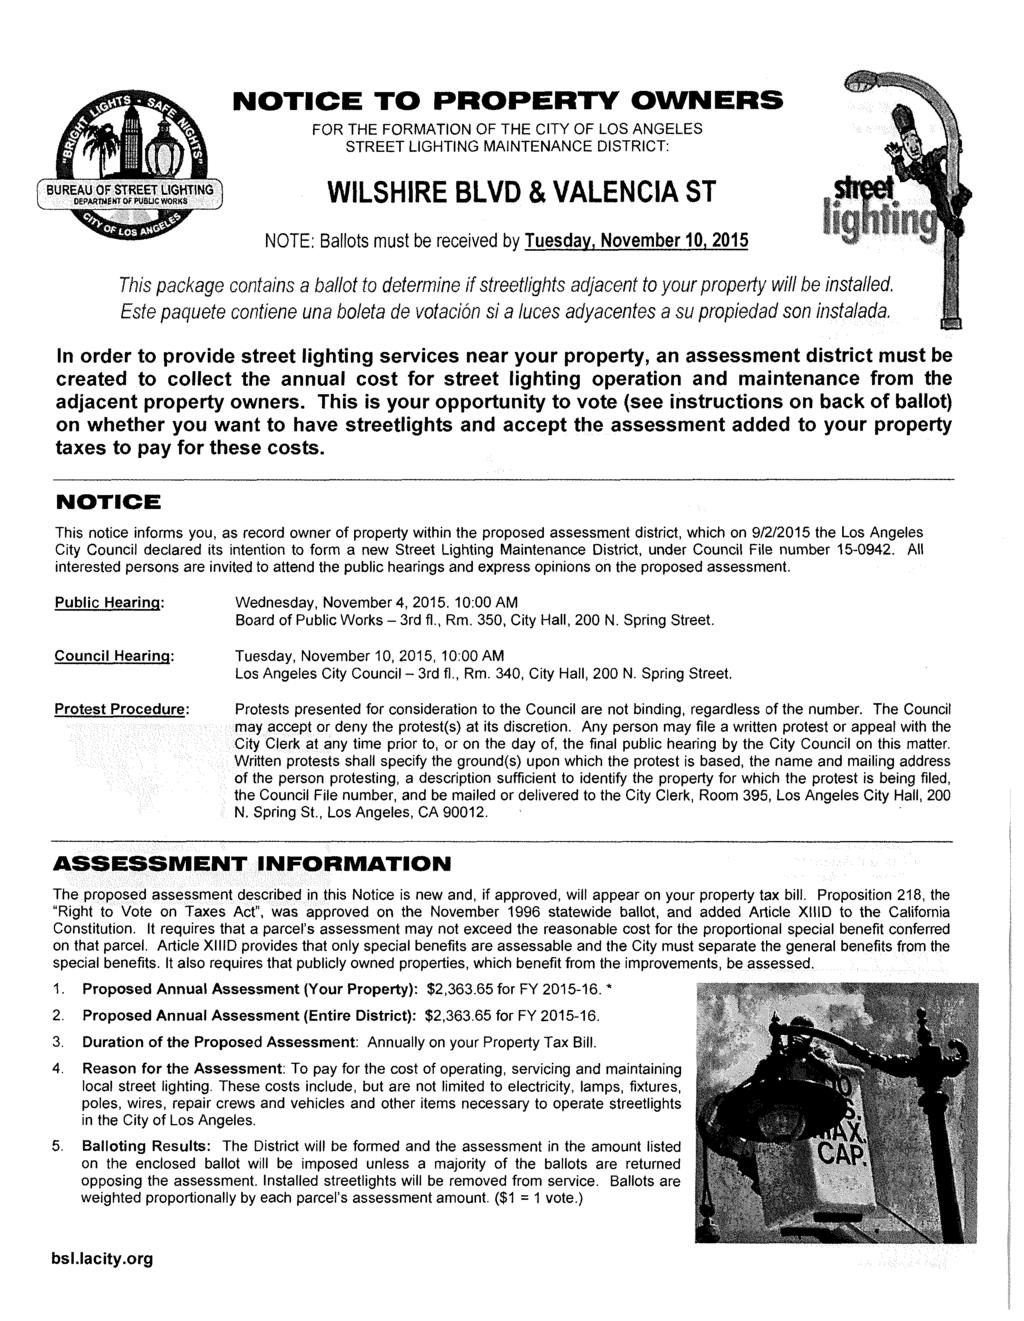 NOTICE TO PROPERTY OWNERS BUREAU OF STREET LIGHTING DEPARTMENT Of PUBLIC WORKS :: FOR THE FORMATION OF THE CITY OF LOS ANGELES STREET LIGHTING MAINTENANCE DISTRICT: WILSHIRE BLVD & VALENCIA ST Ag A S